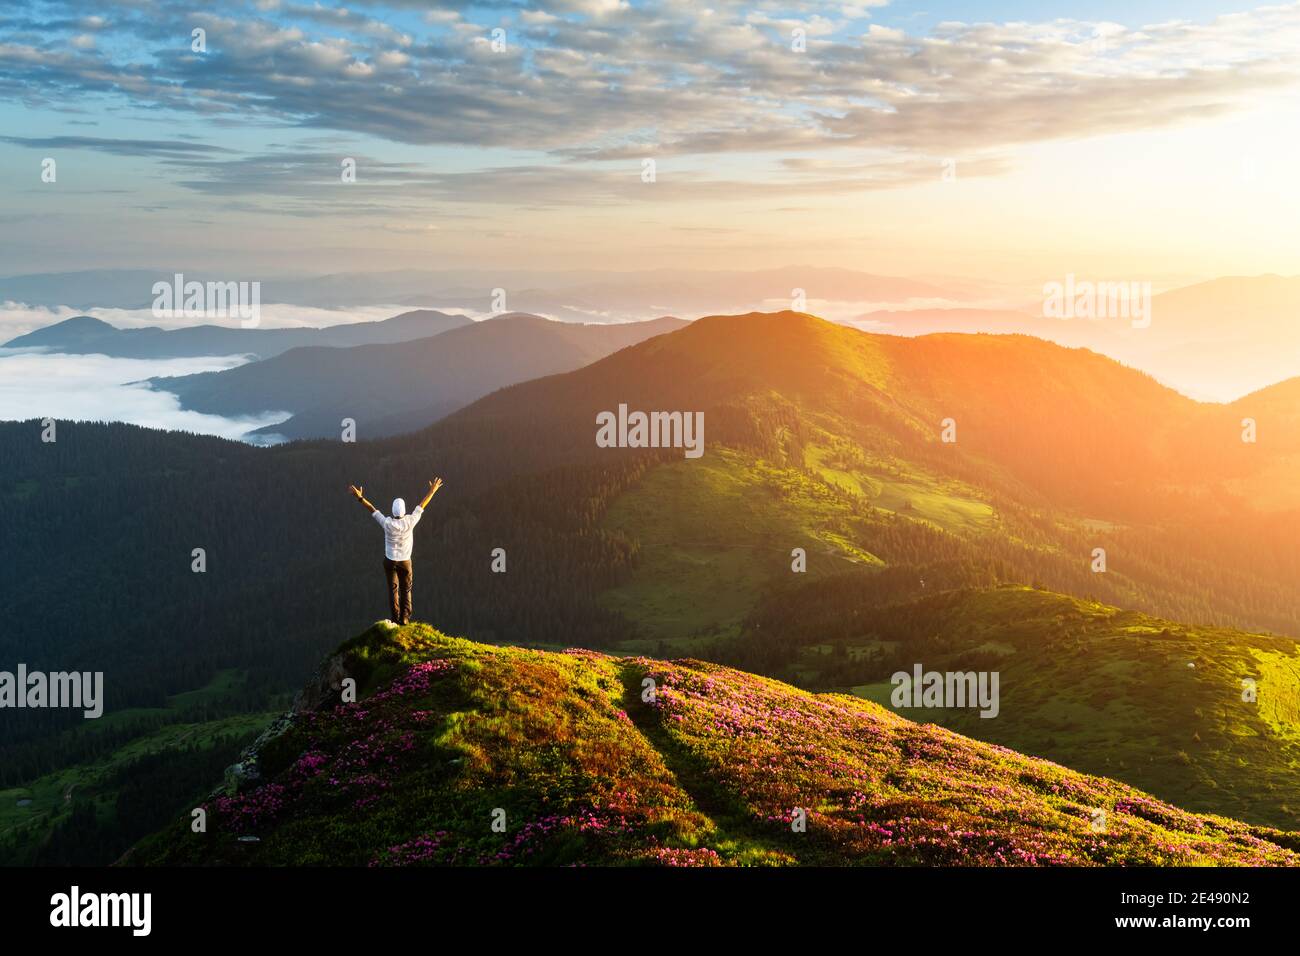 A tourist in white shirt on the edge of a cliff covered with a pink carpet of rhododendron flowers in the summer. Foggy mountains on the background. Landscape photography Stock Photo